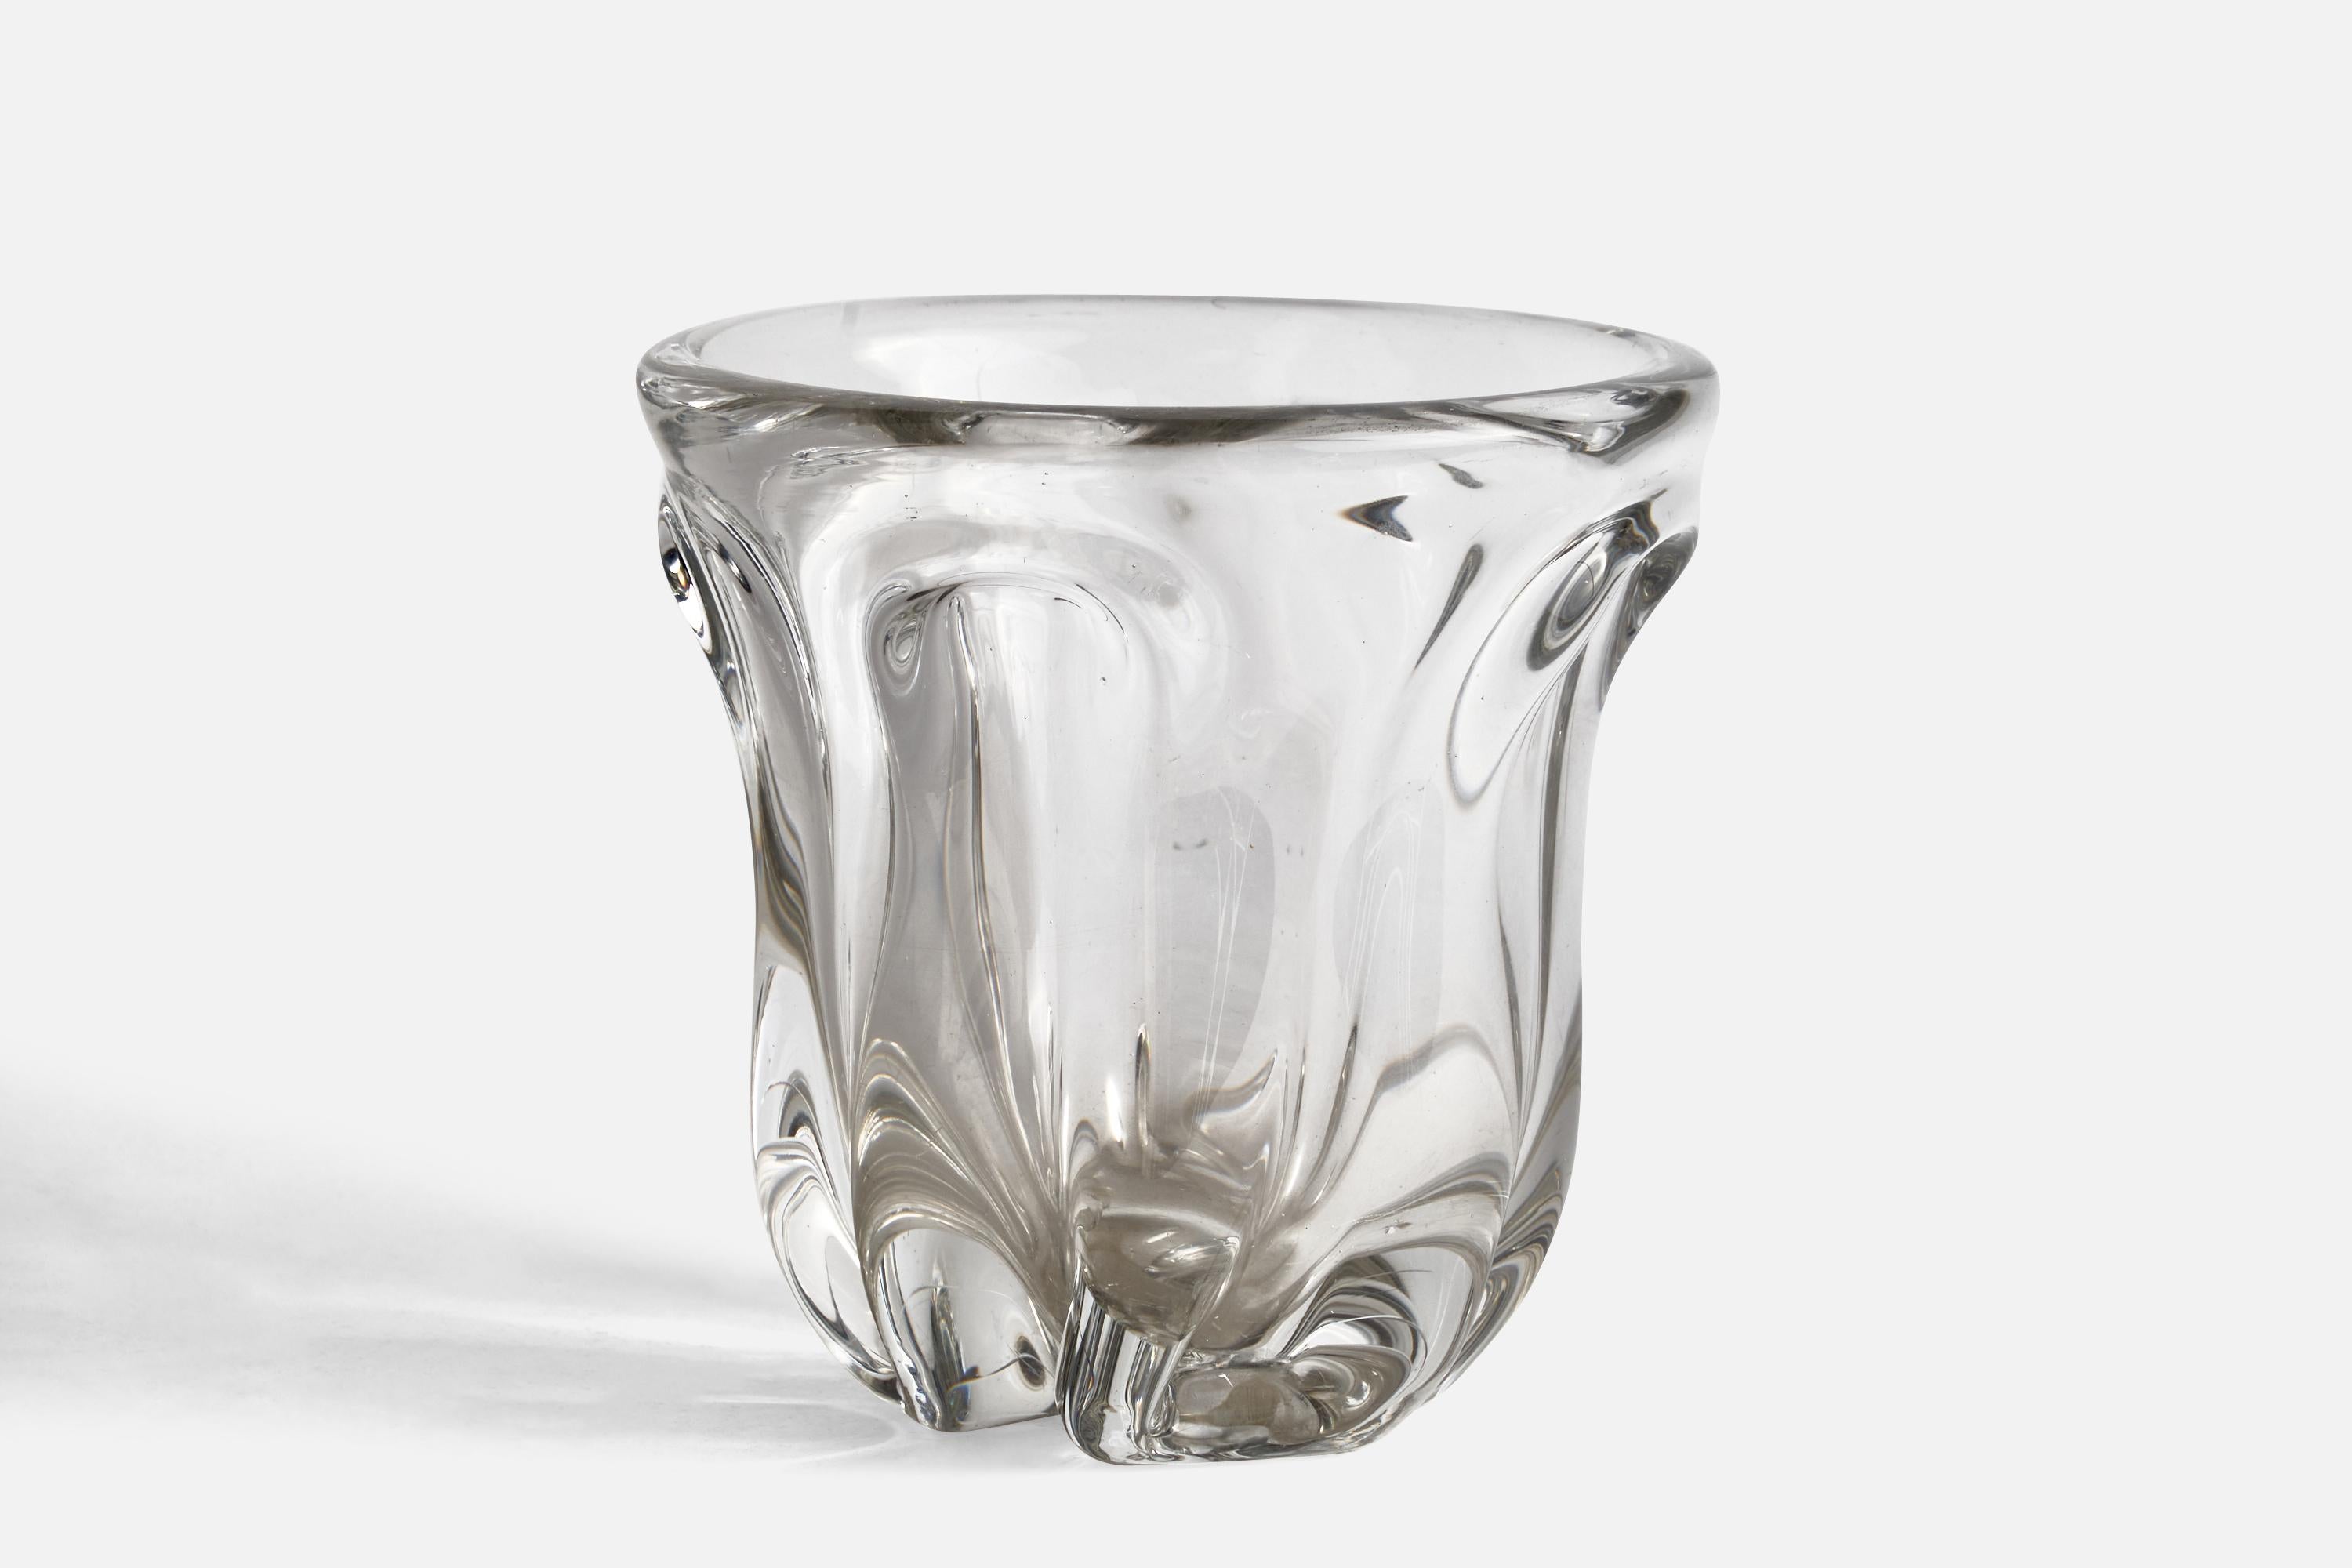 A blown murano-glass vase designed and produced in Italy, c. 1940s.